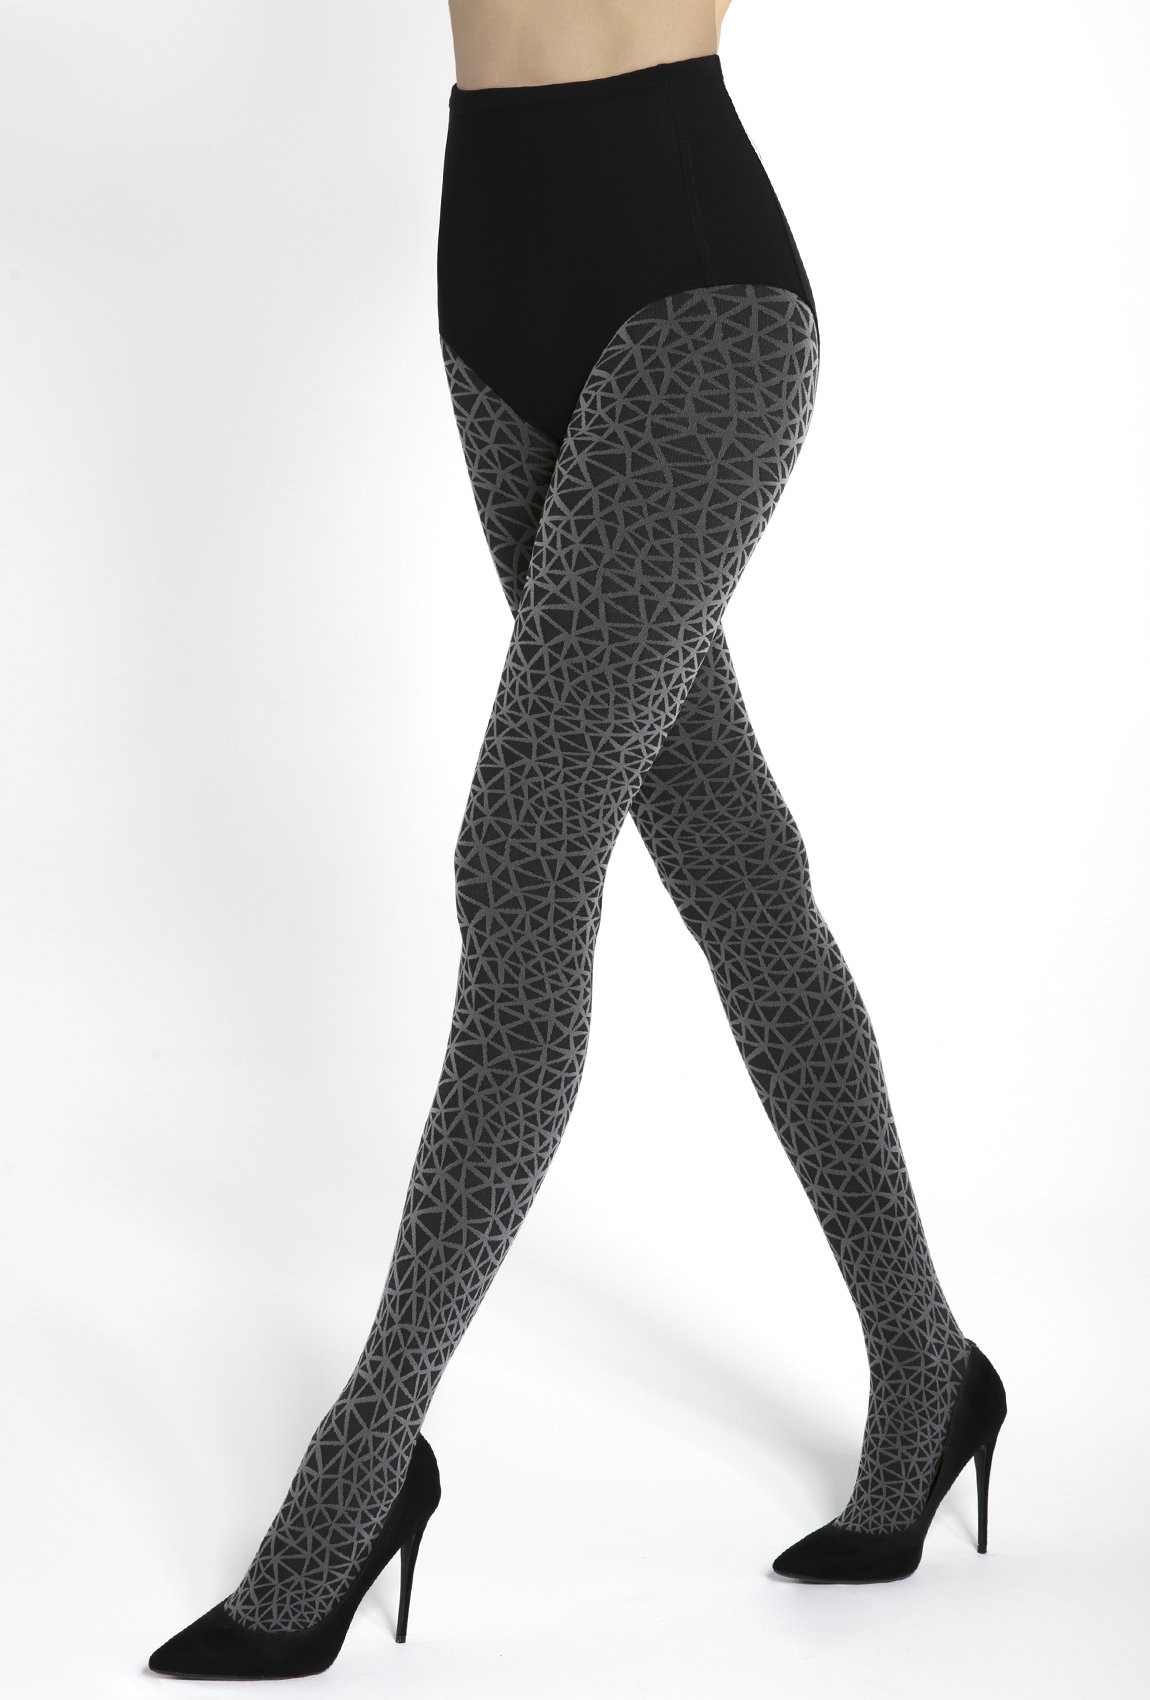 Sheer Black Patterned Tights with Bow Details - 20 den - SWEETY 14 - FINAL  SALE - NO RETURNS